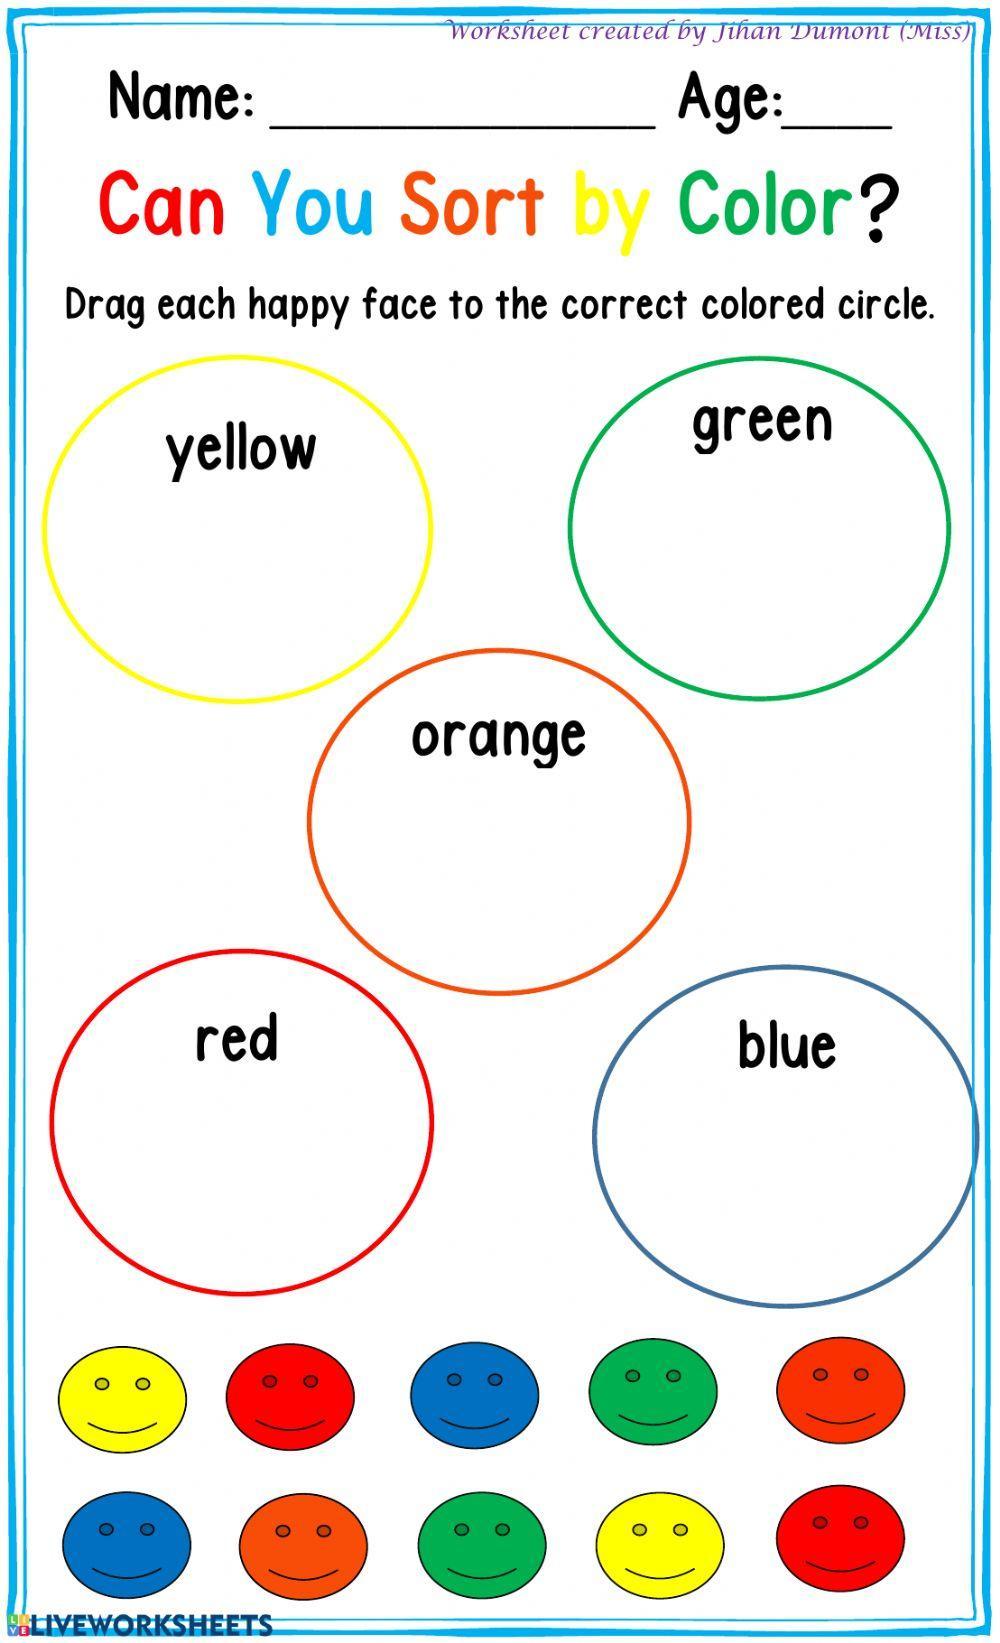 Classification by Color